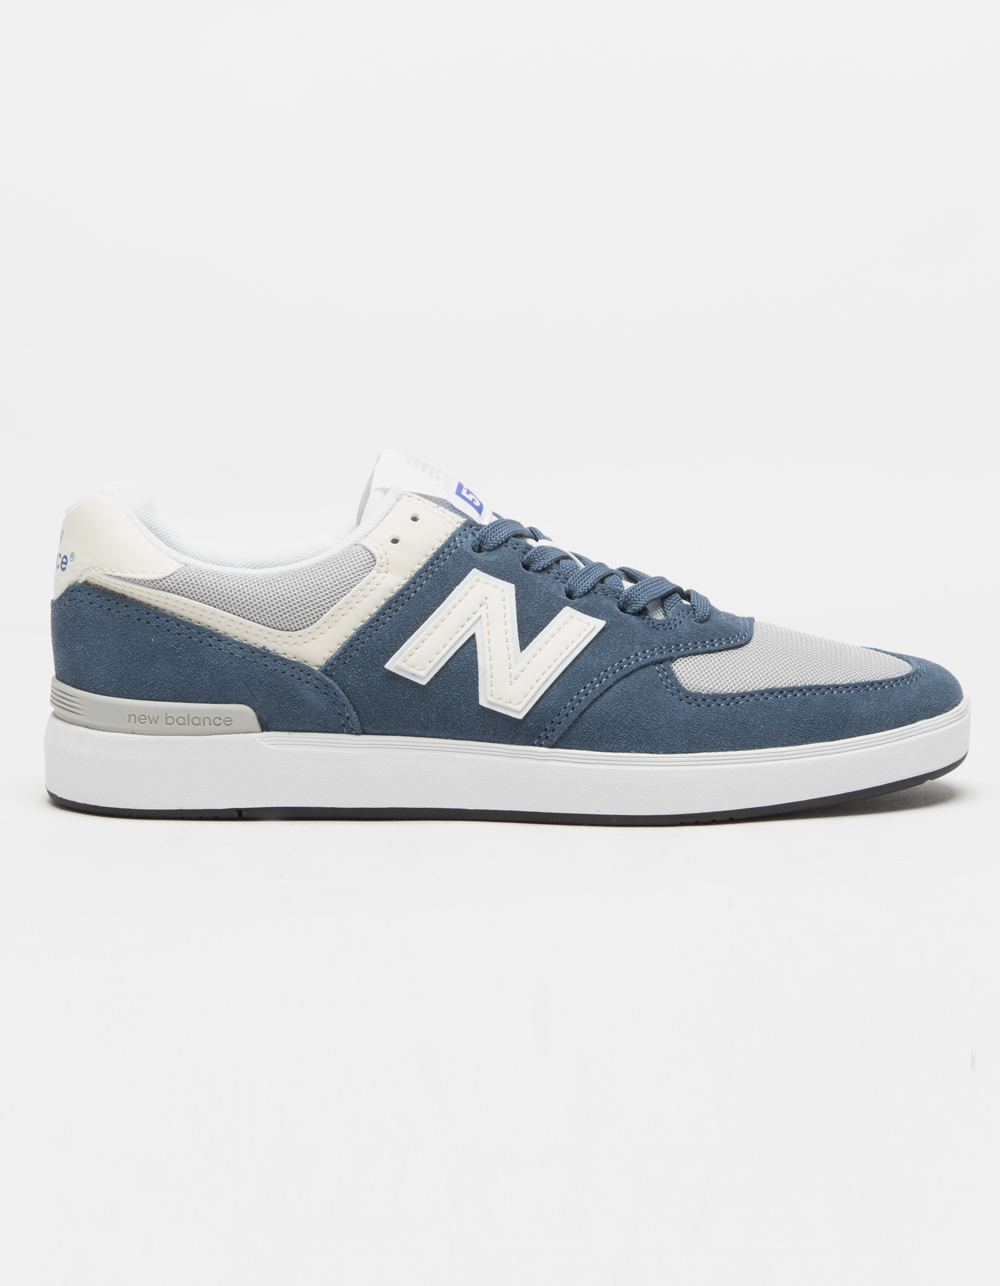 NEW BALANCE All Coasts 574 Mens Shoes - BLUE COMBO | Tillys